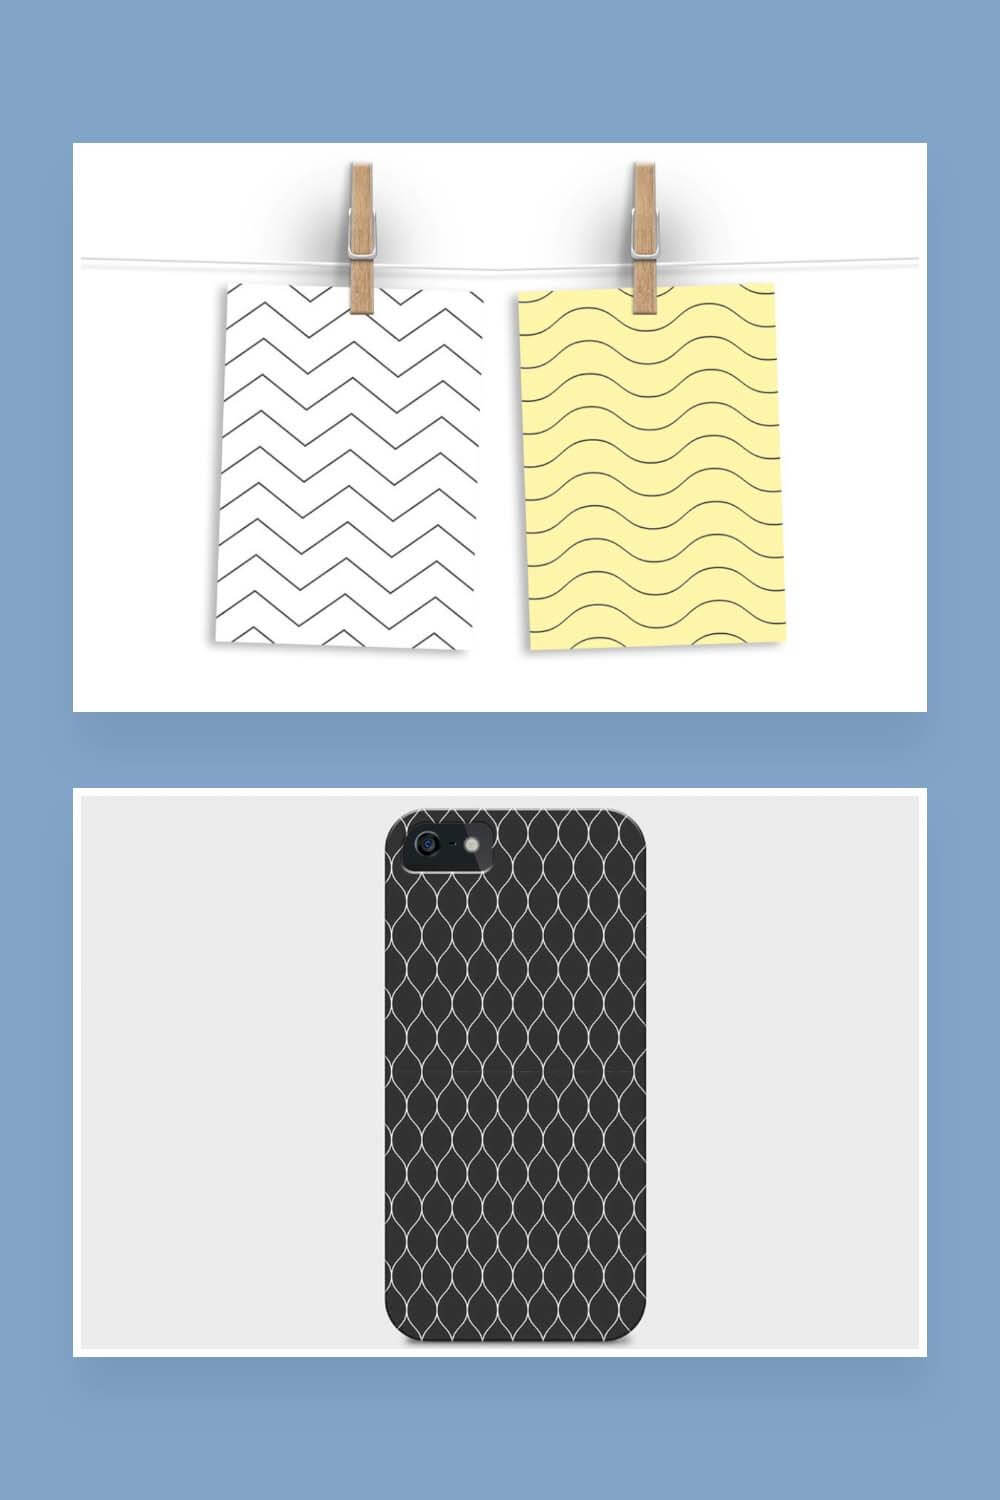 A set of simple seamless patterns on two cards and a phone case.